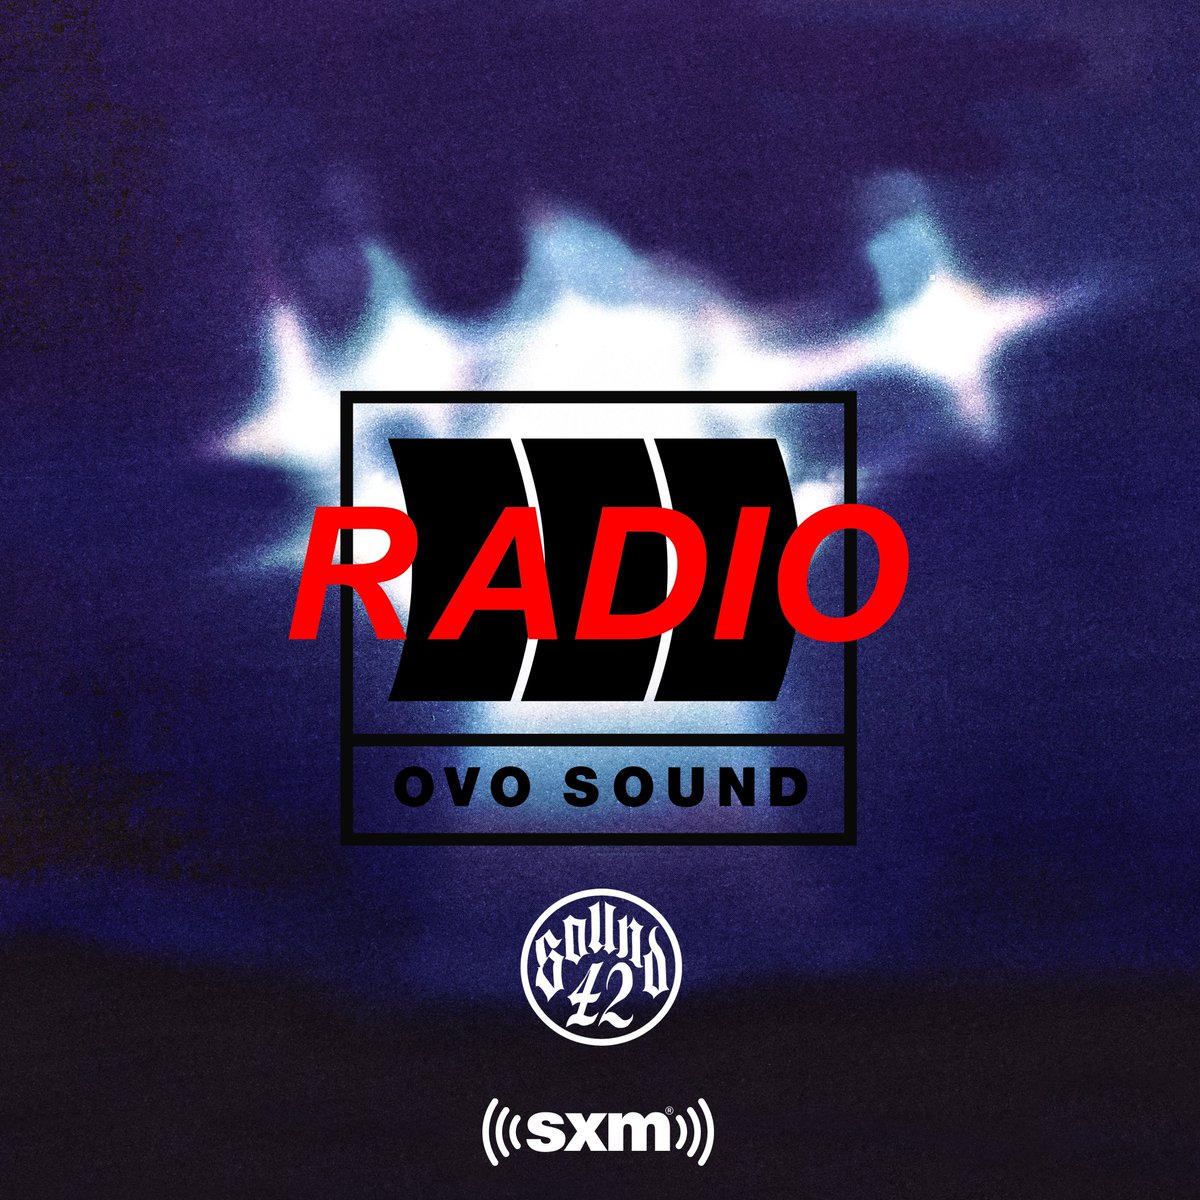 OVO Sound Radio Season 3 Episode 14 Tonight at 10PM EST. On Sound 42 (Ch 42) @SIRIUSXM Hosted & curated by @oliverelkhatib with a guest mix by @G0HomeRoger ovosound.lnk.to/SOUND42 Artwork by @Ben_Dorado